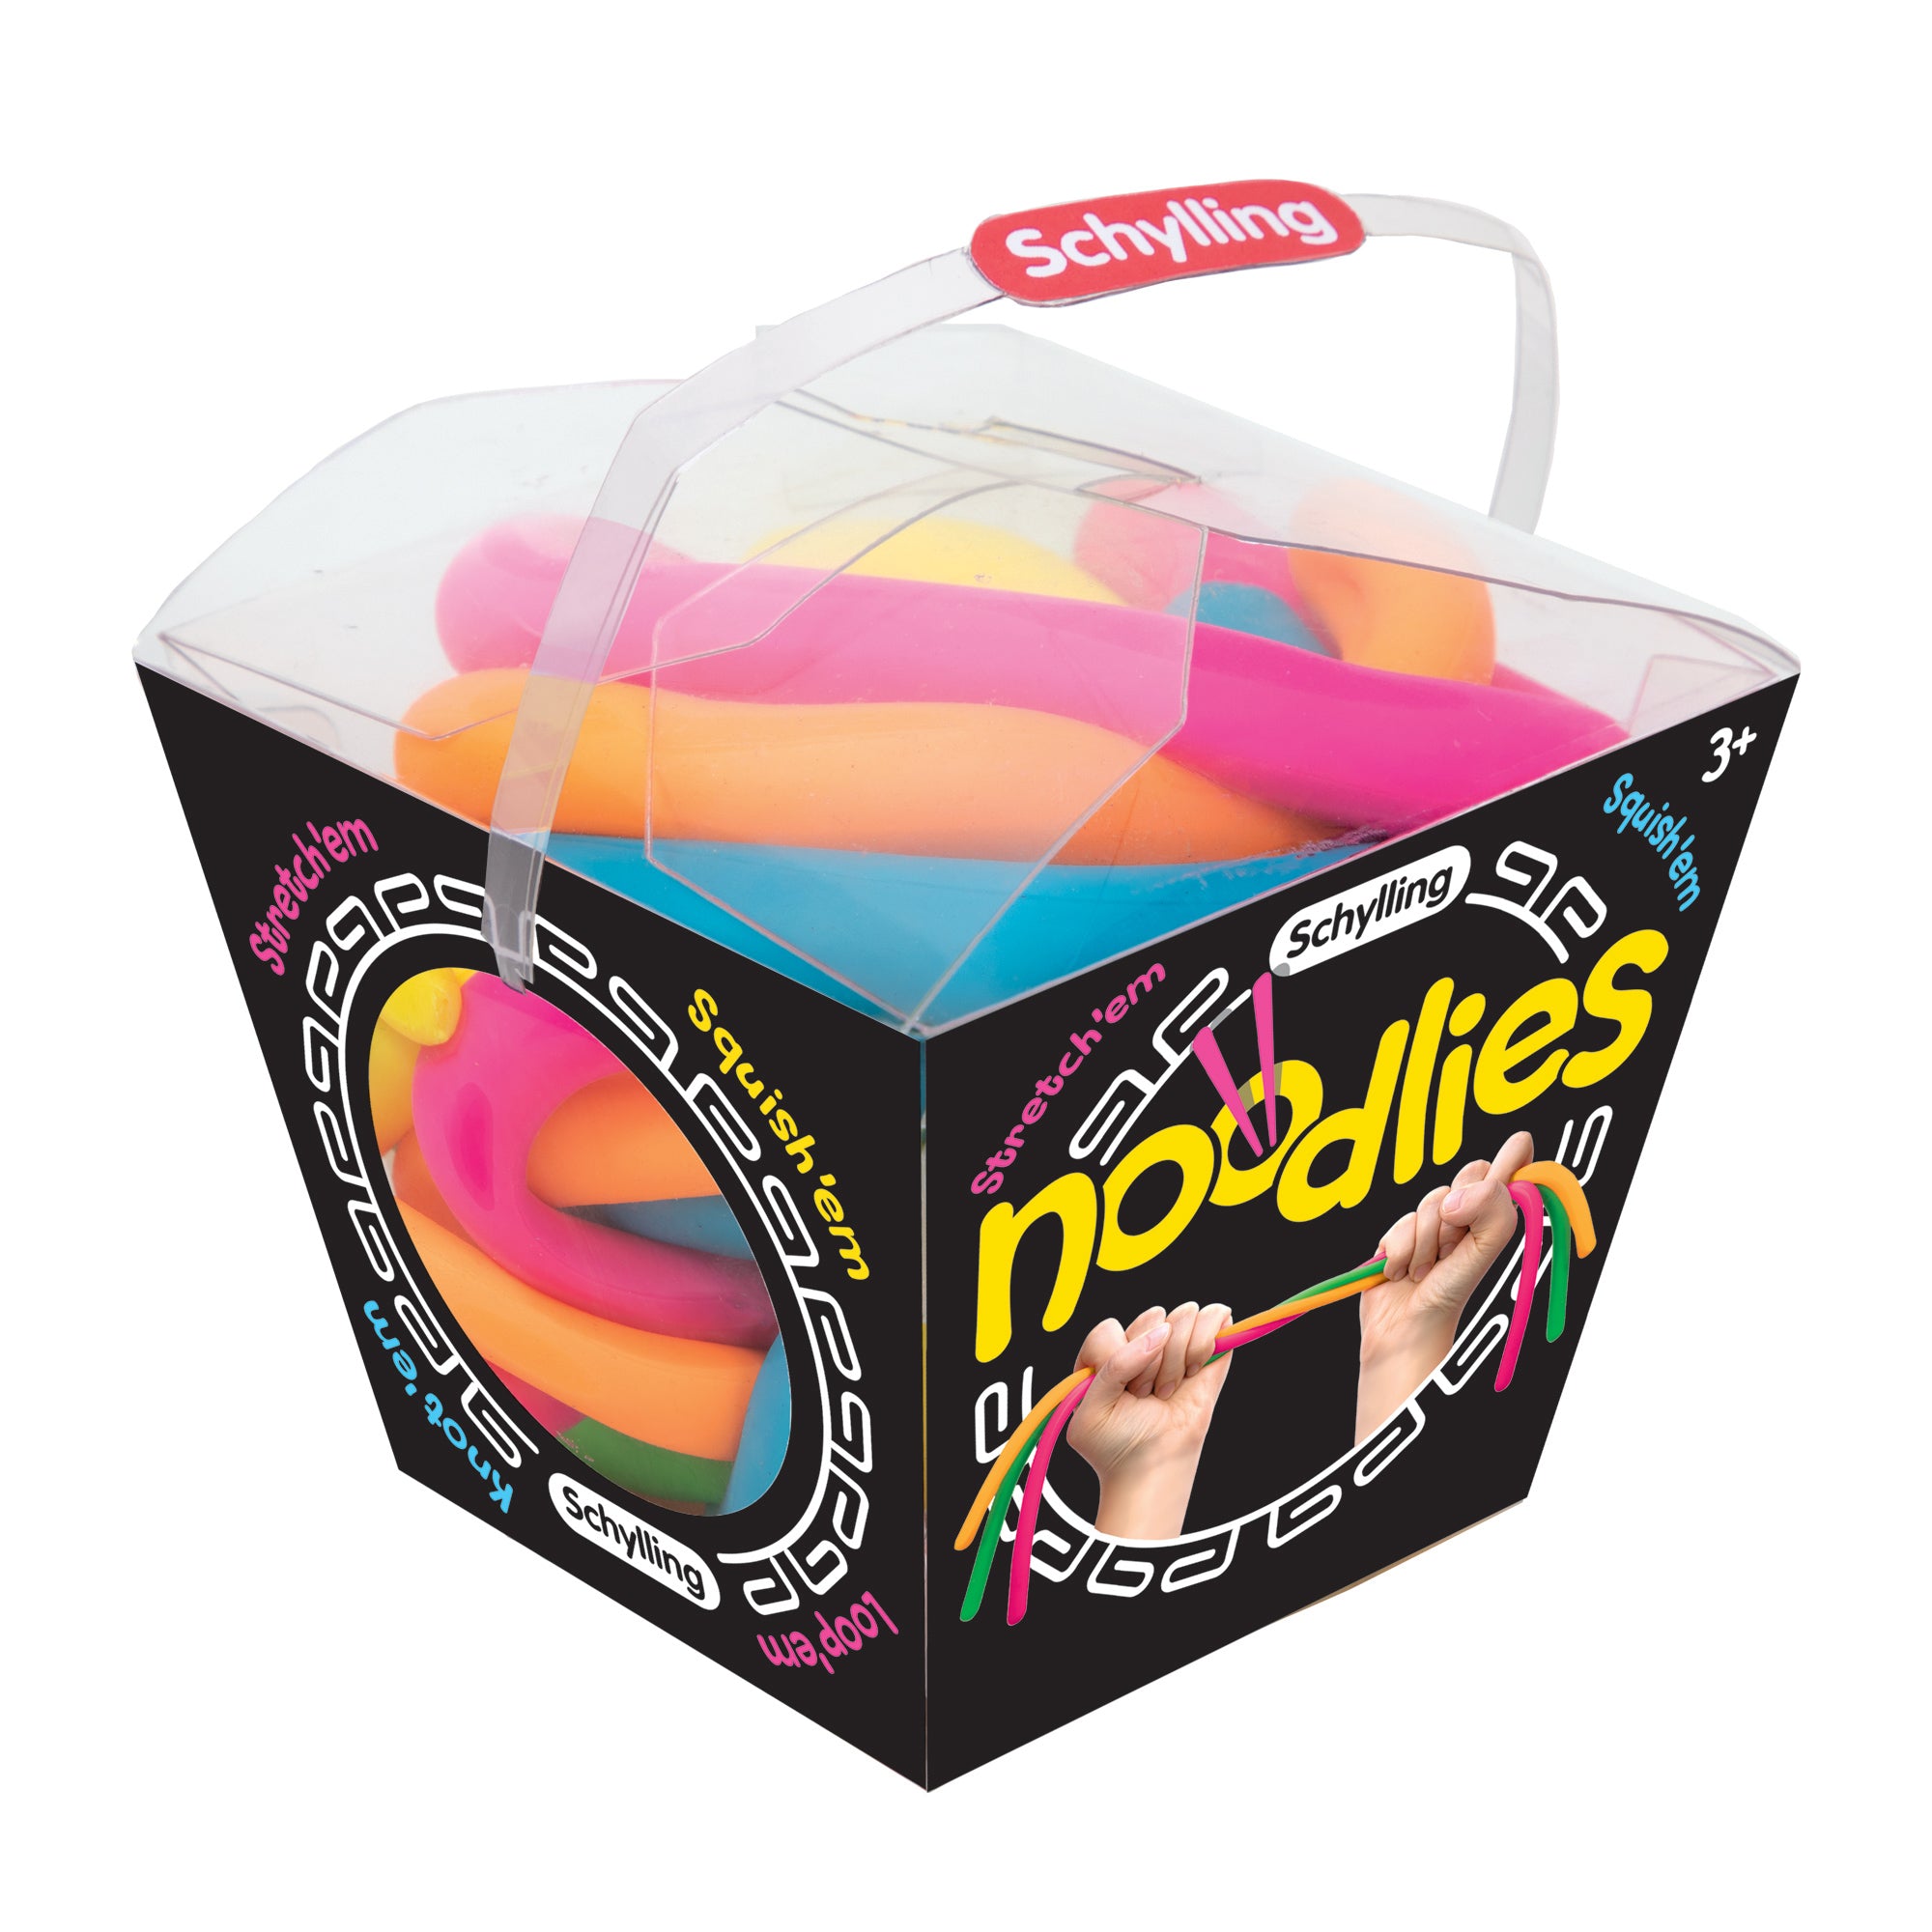 The product package for Noodlies.